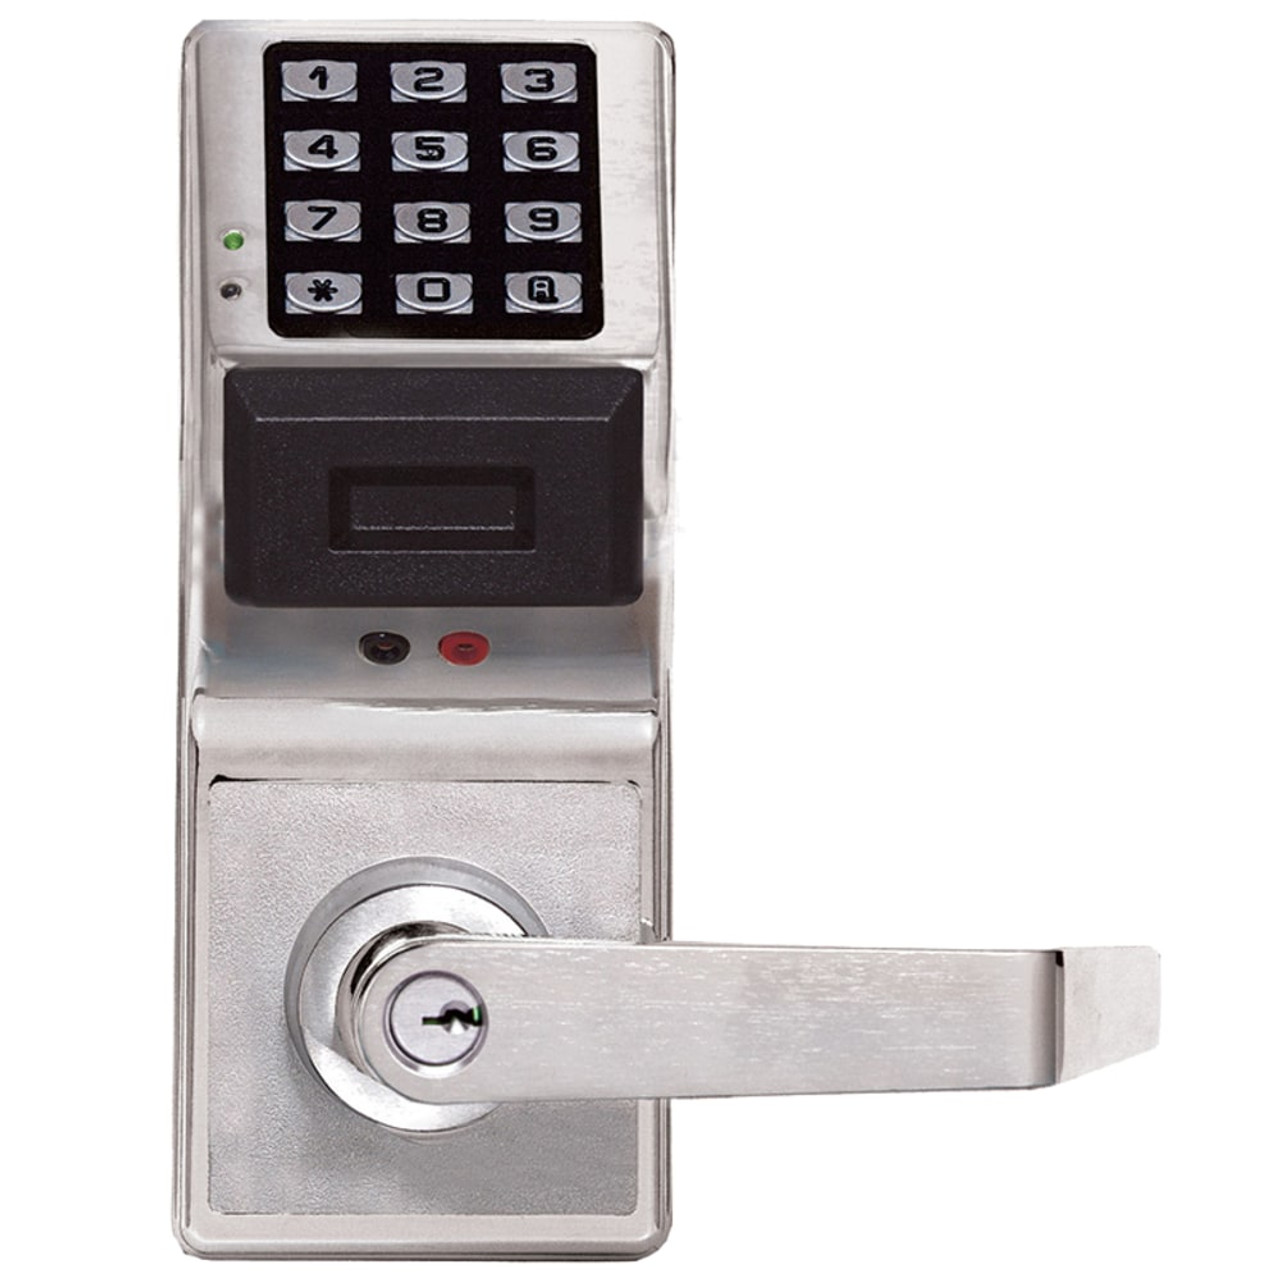 Alarm Lock PDL4100 US26D Pushbutton Cylindrical Door Lock with Prox Reader  2000 Users 40000 Event Audit Trail Weatherproof Straight Lever Satin Chrome  B and H Depot Door Hardware Shop